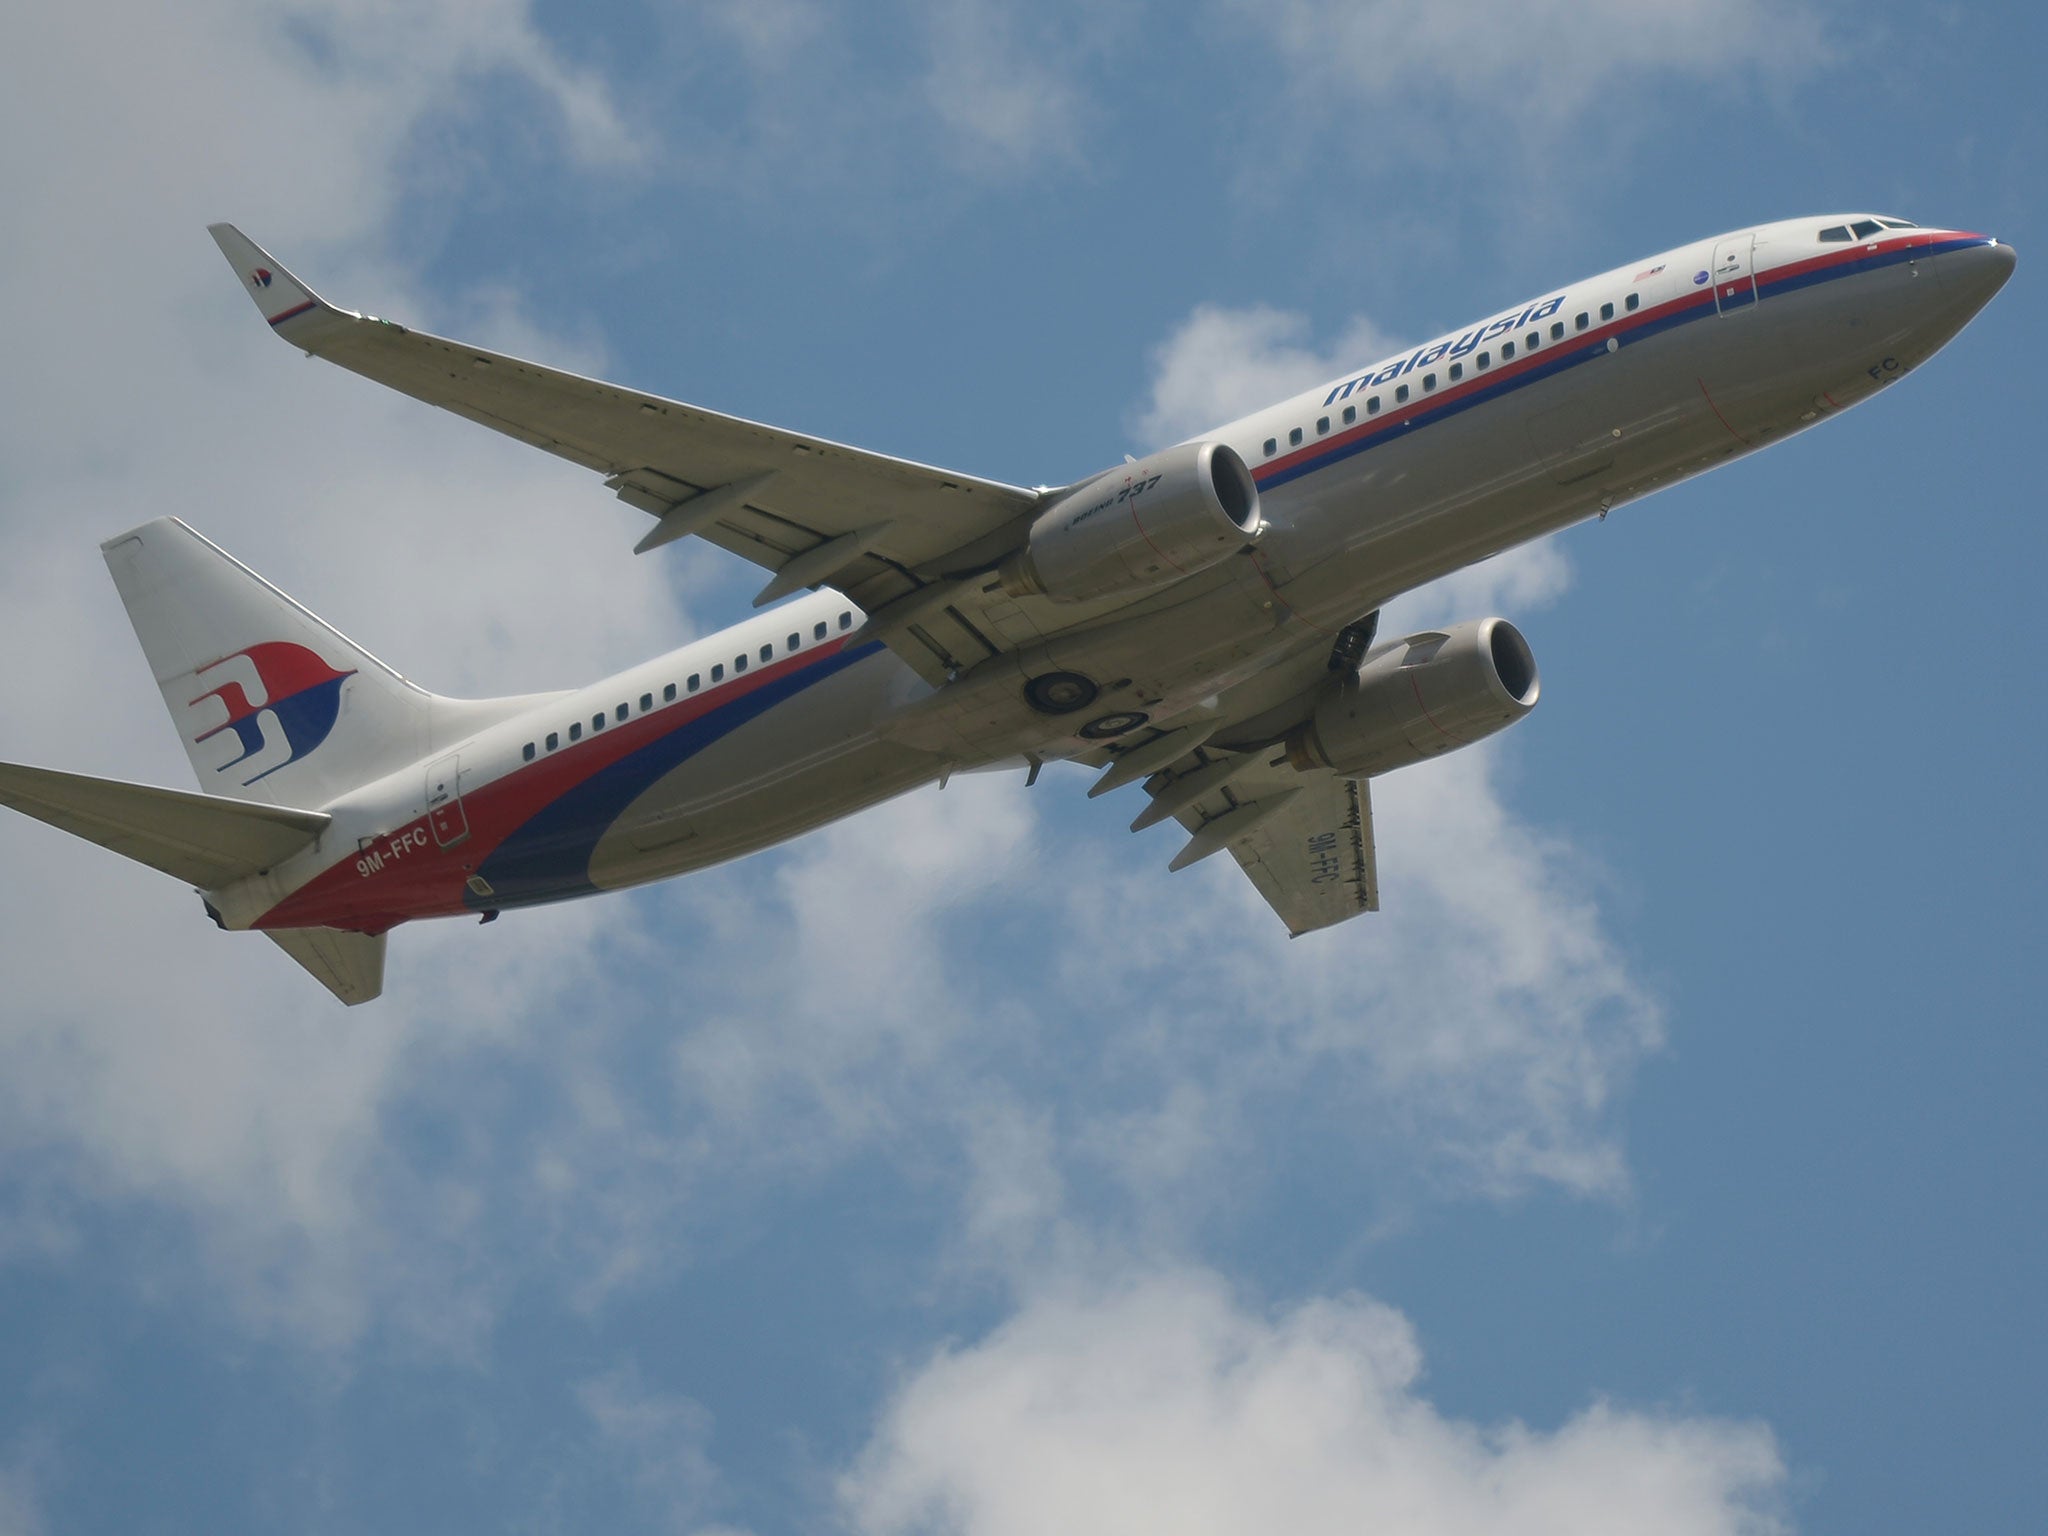 Malaysia Airlines received criticism for choosing to fly over war-torn Syria